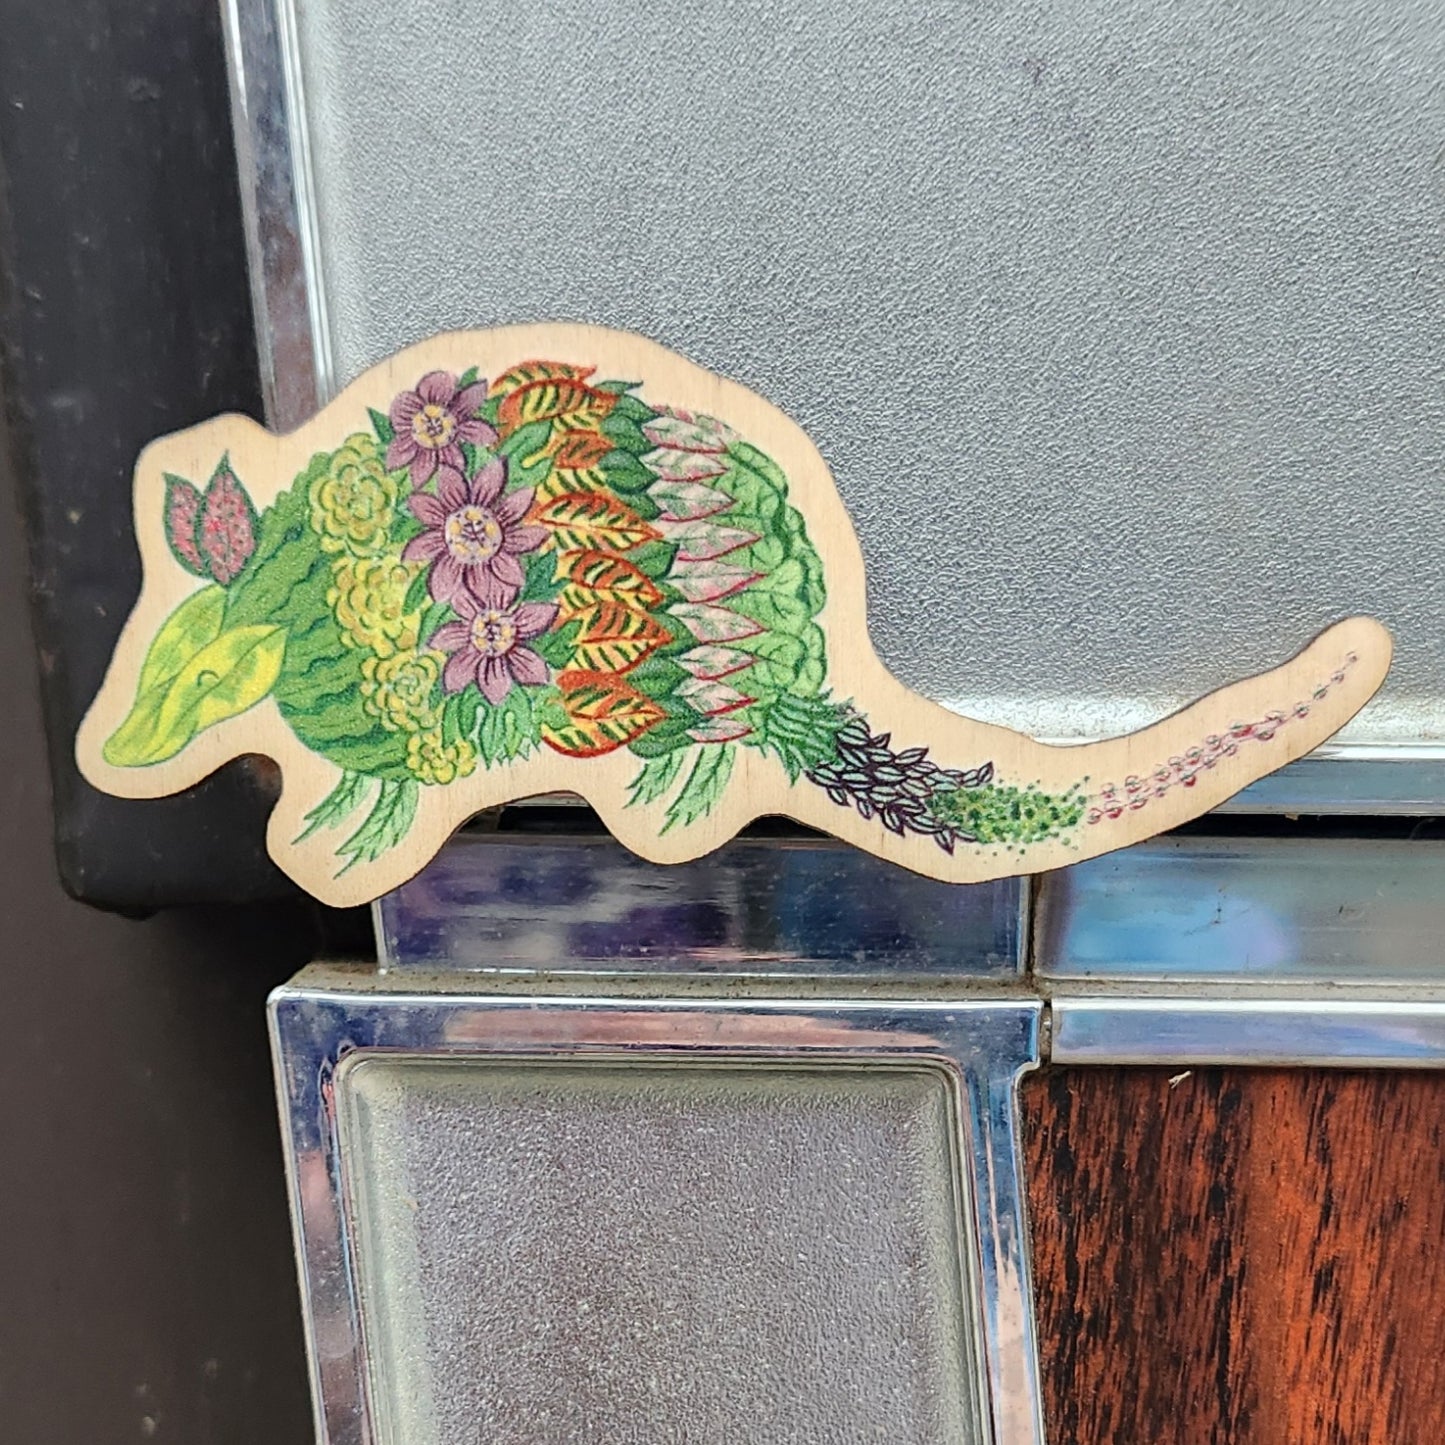 Groovy Plants Ranch Armadillo Magnet